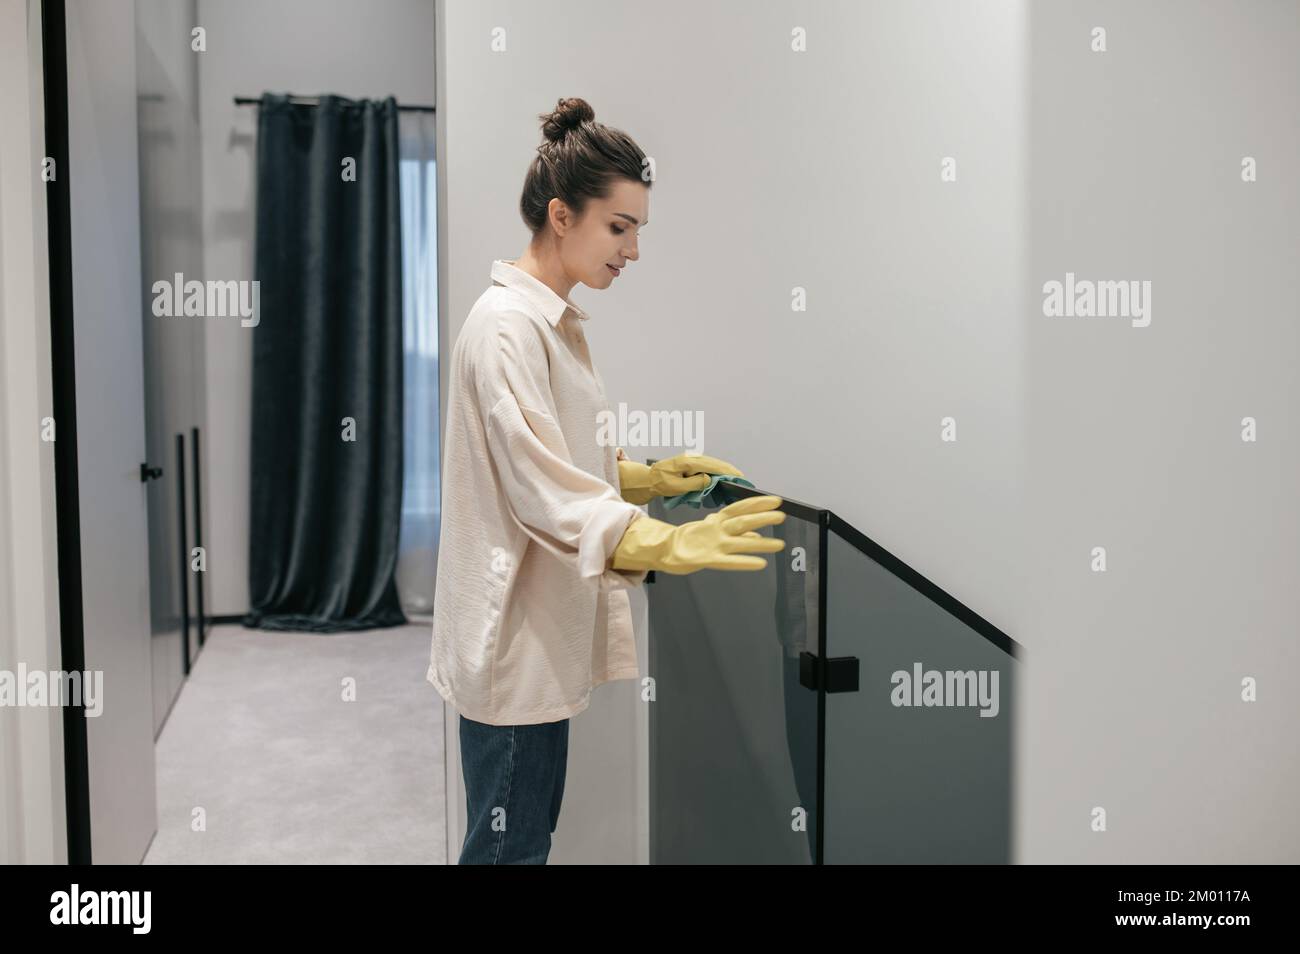 Housekeeping. Young dark-haired woman cleaning the stairs. Stock Photo